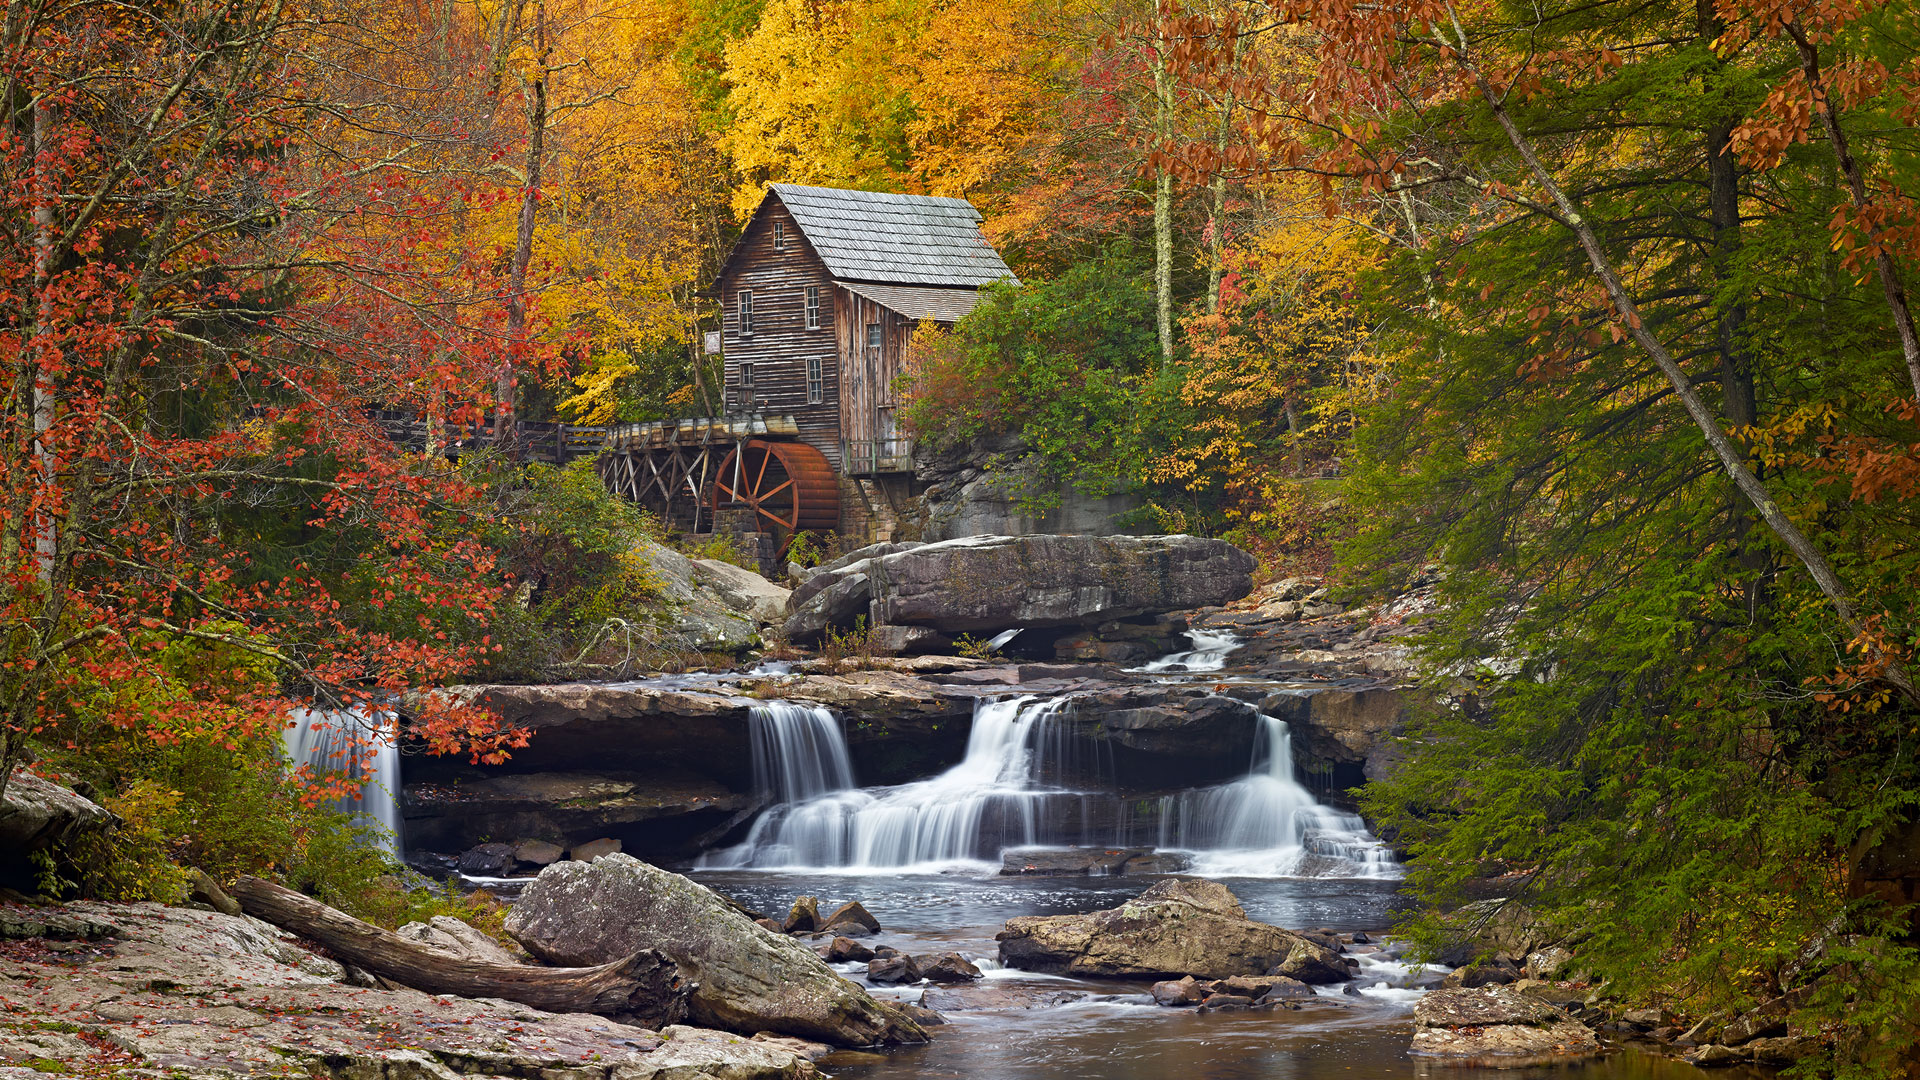 West Virginia Autumn - Babcock State Park, Glade Creek Grist Mill - HD Wallpaper 